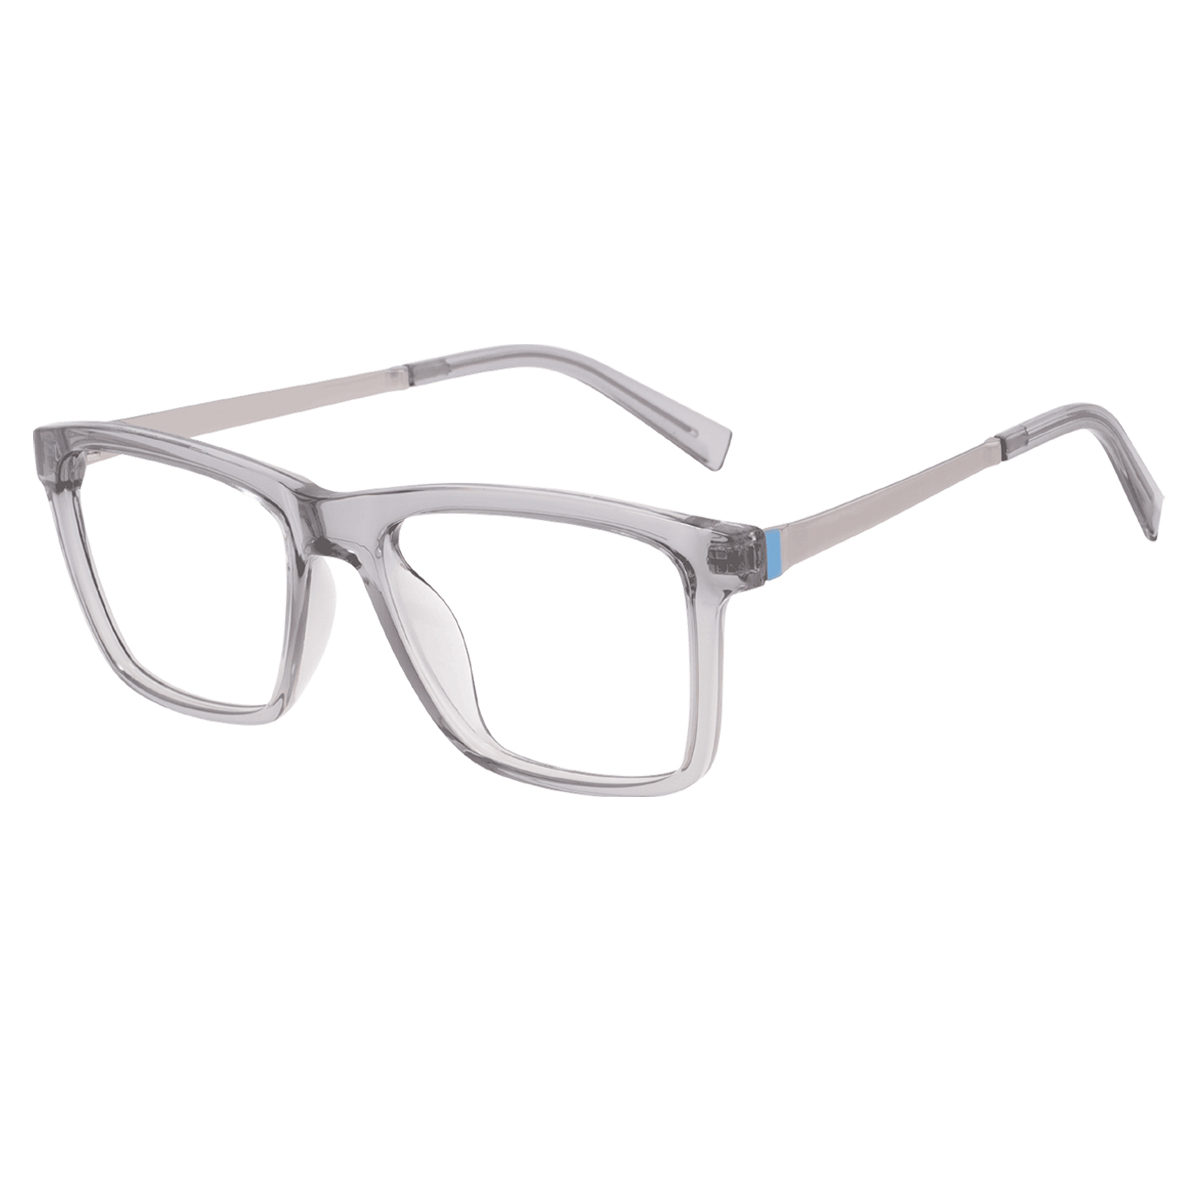 Aether - Square Transparent-Gray Reading Glasses for Men